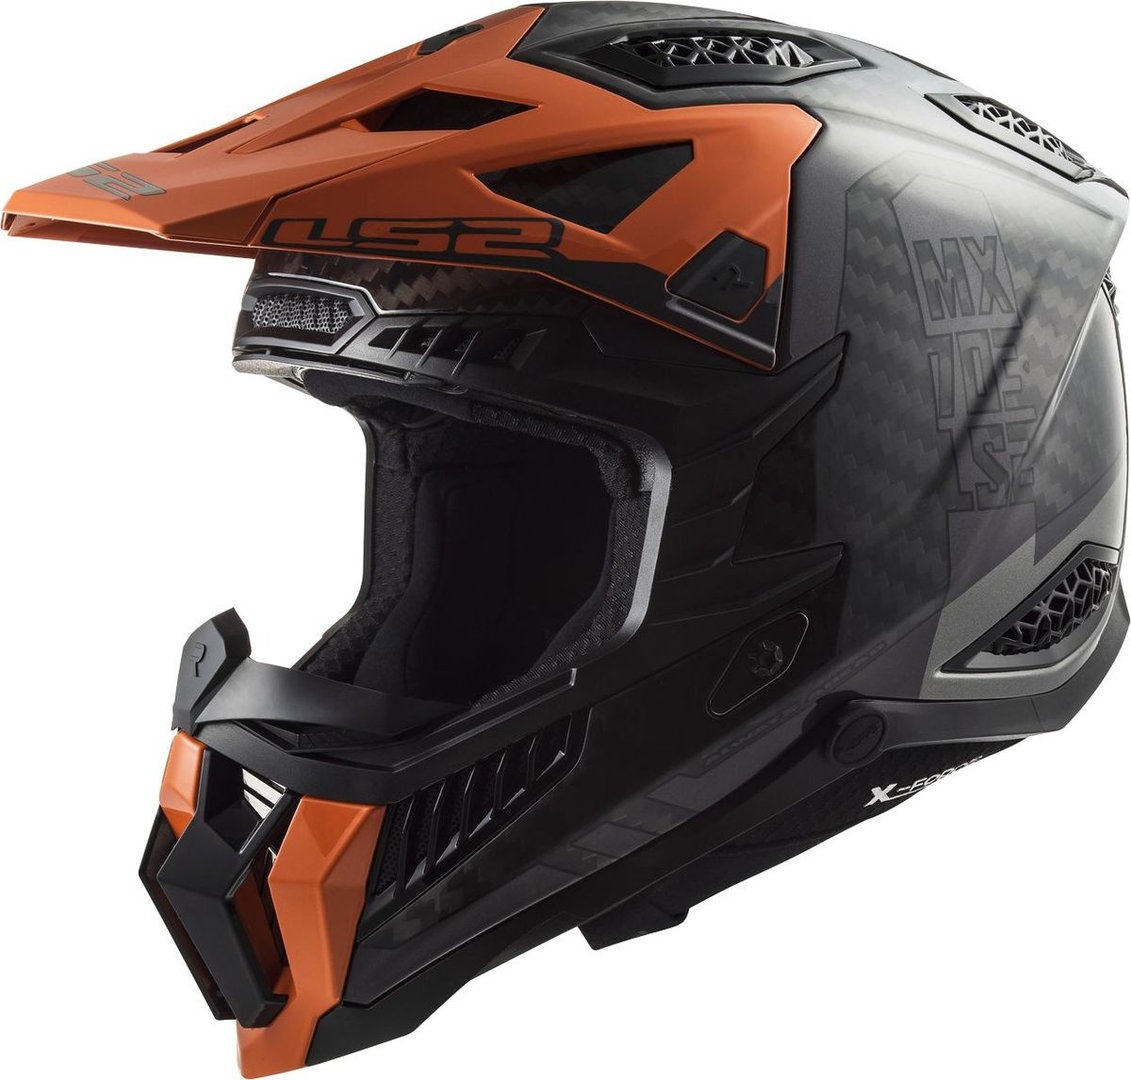 MX 703 X-FORCE CARBON VICTORY 